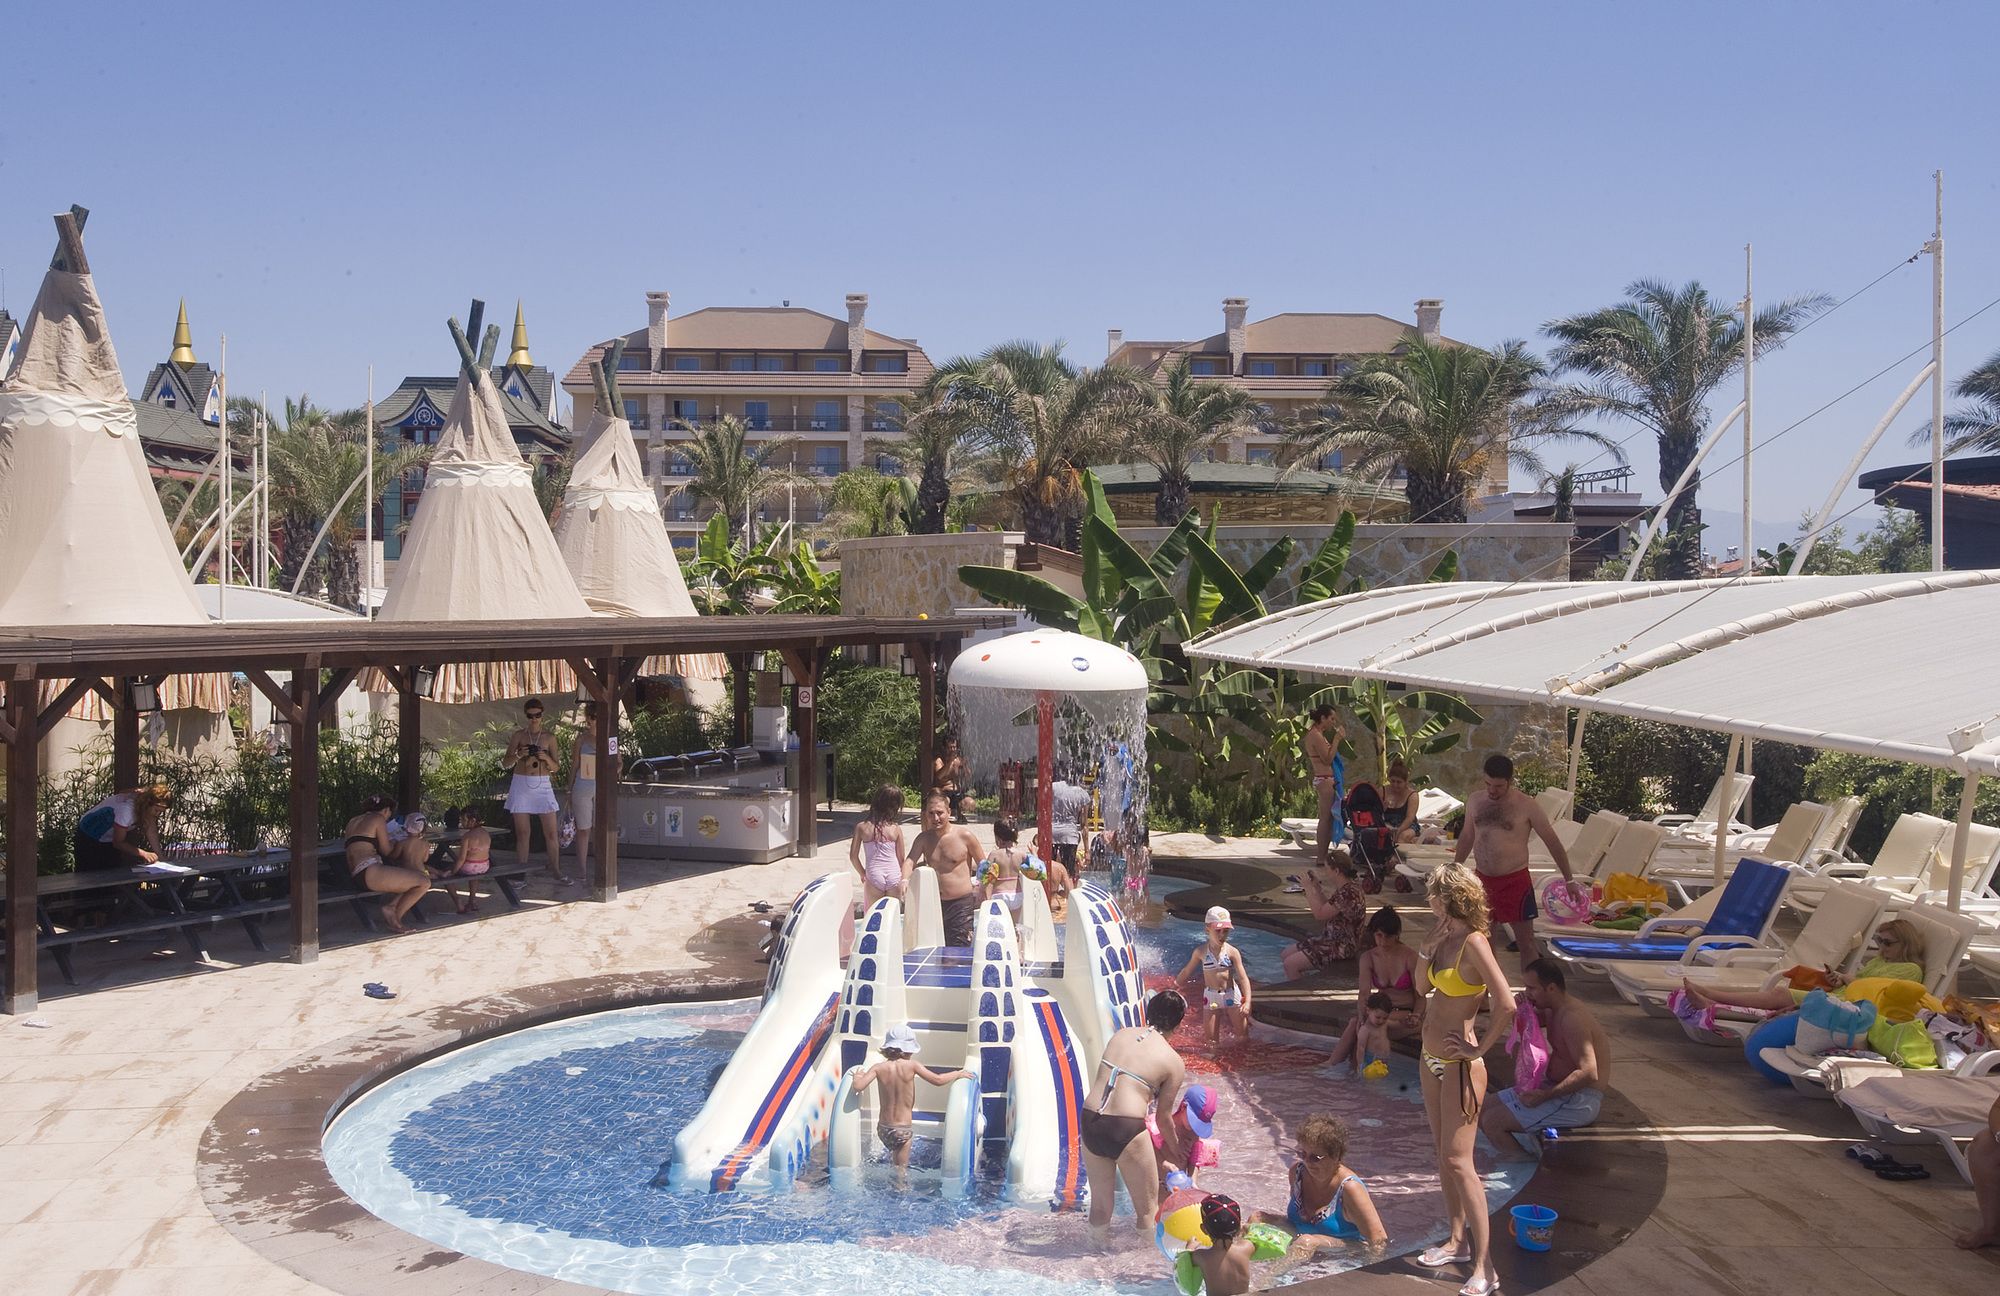 Crystal Family Resort & Spa – All Inclusive